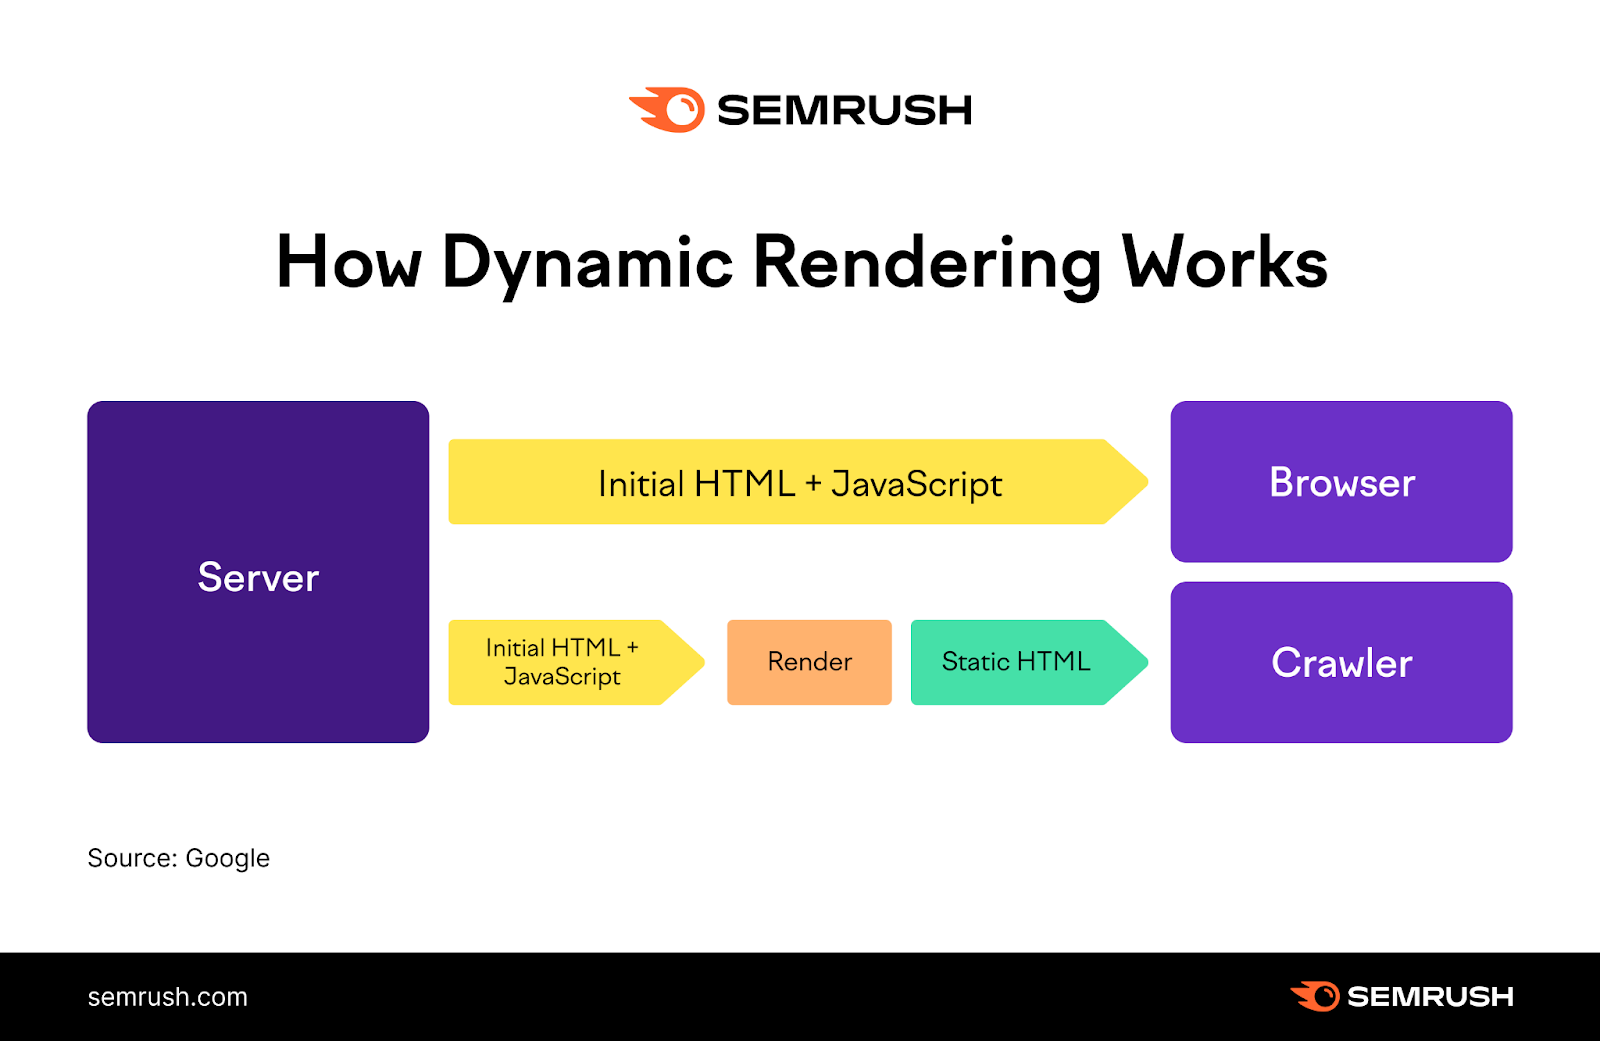 Dynamic rendering means Initial HTML and JavaScript are rendered differently for browsers and crawlers